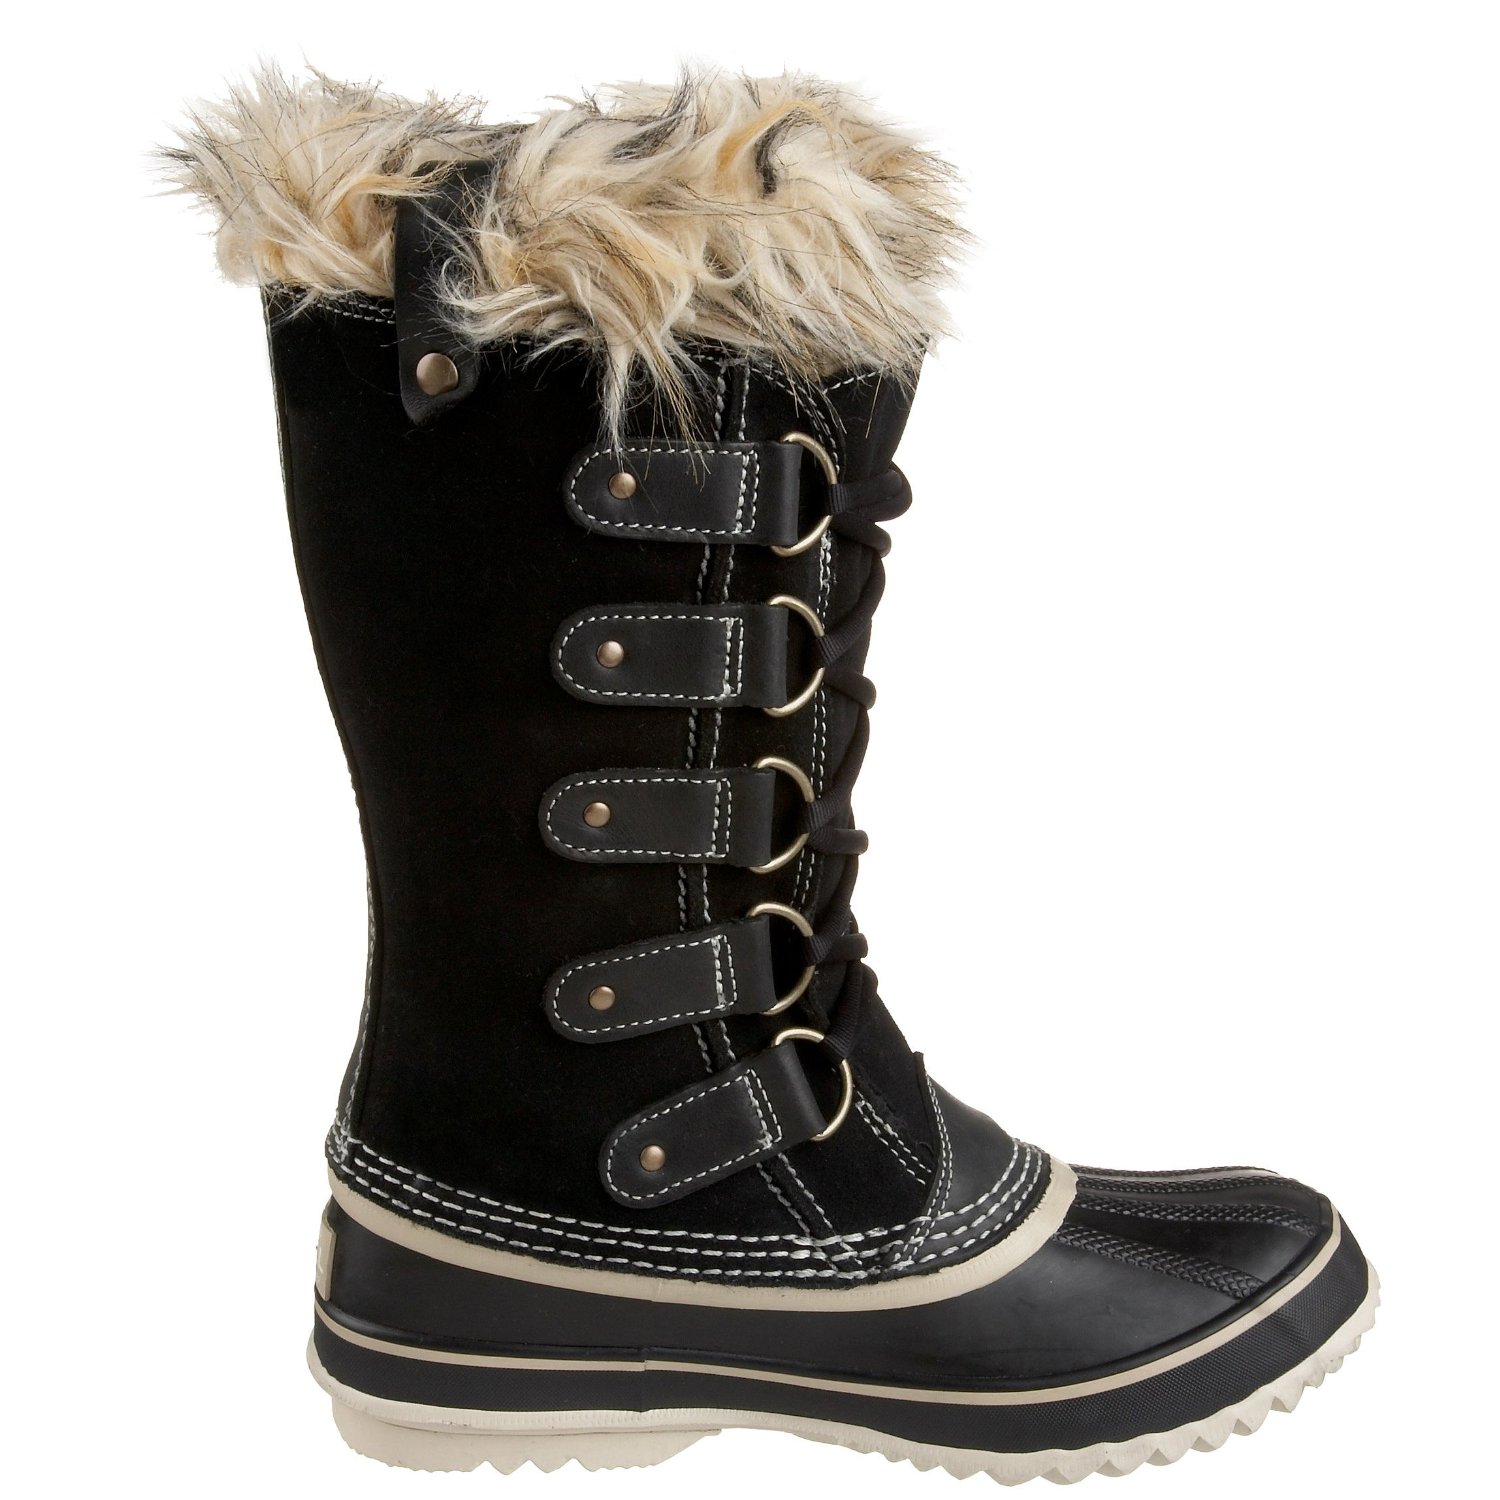 Snow Boots For Women Sale - Yu Boots